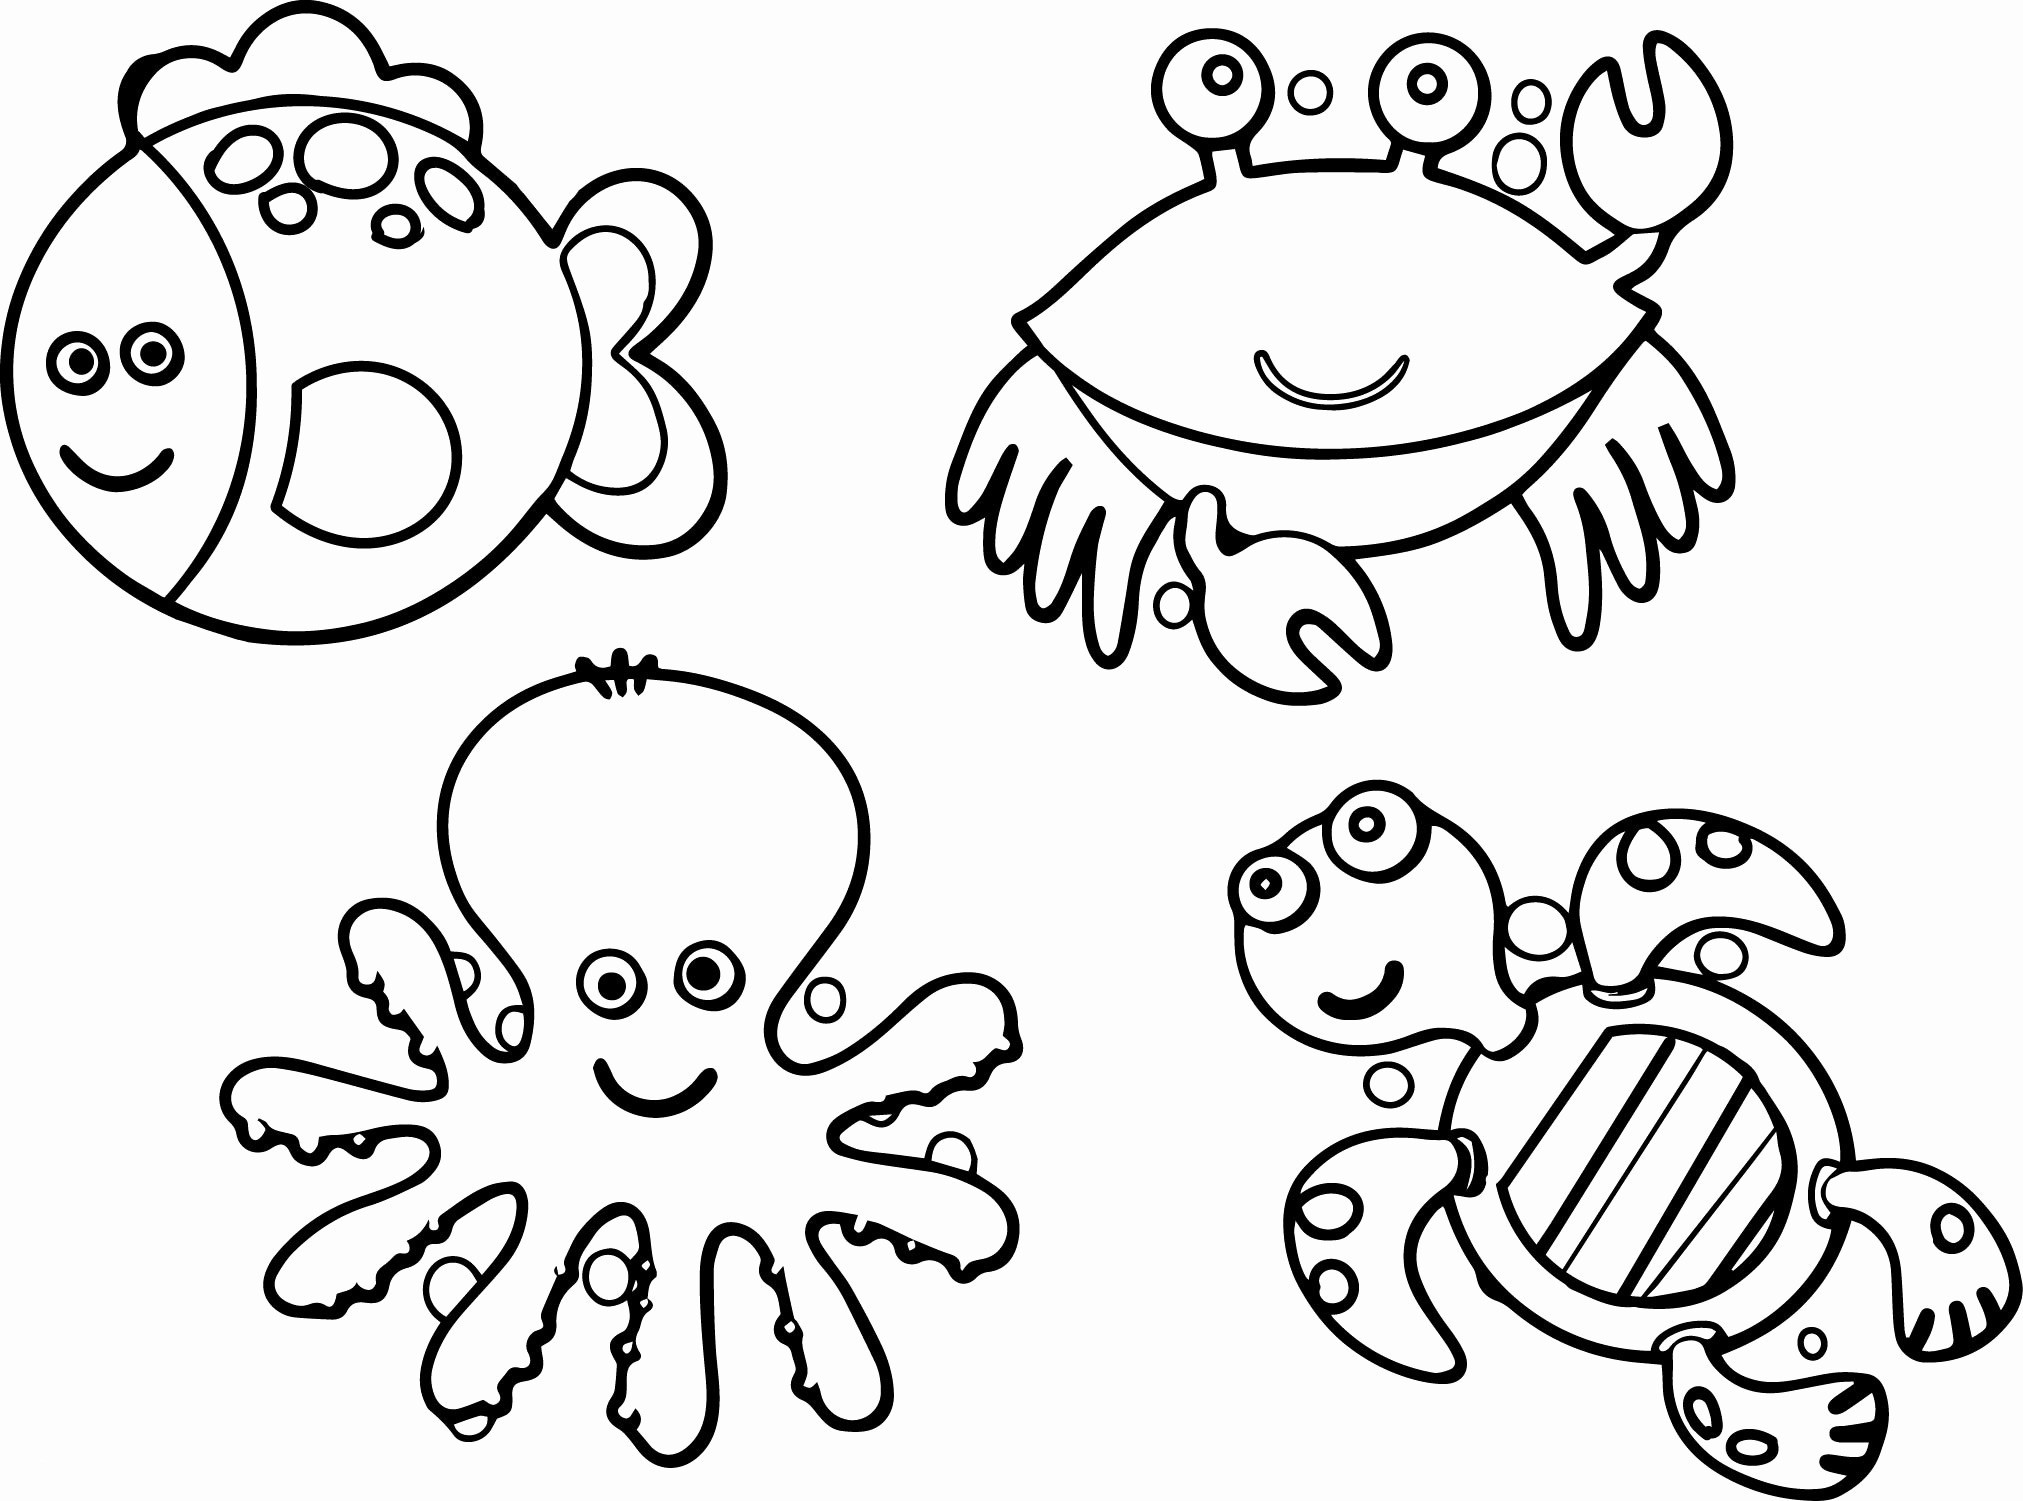 Water Animal Coloring Pages Elegant Ocean Animals Coloring Pages Heathermarxgallery